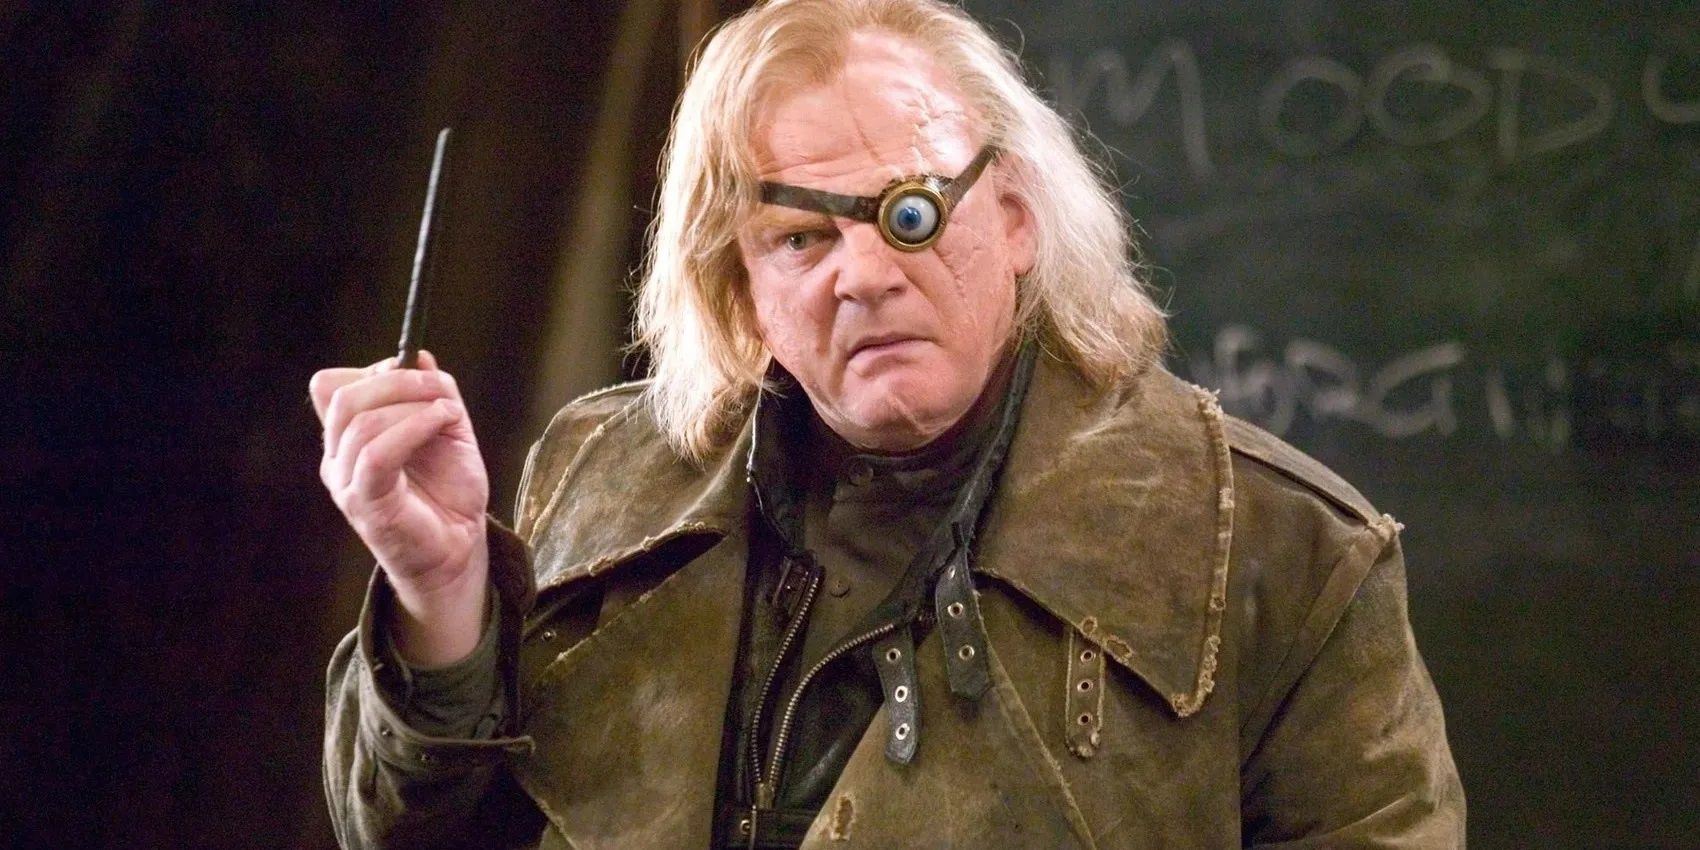 Mad-Eye Moody holding his wand in Harry Potter.